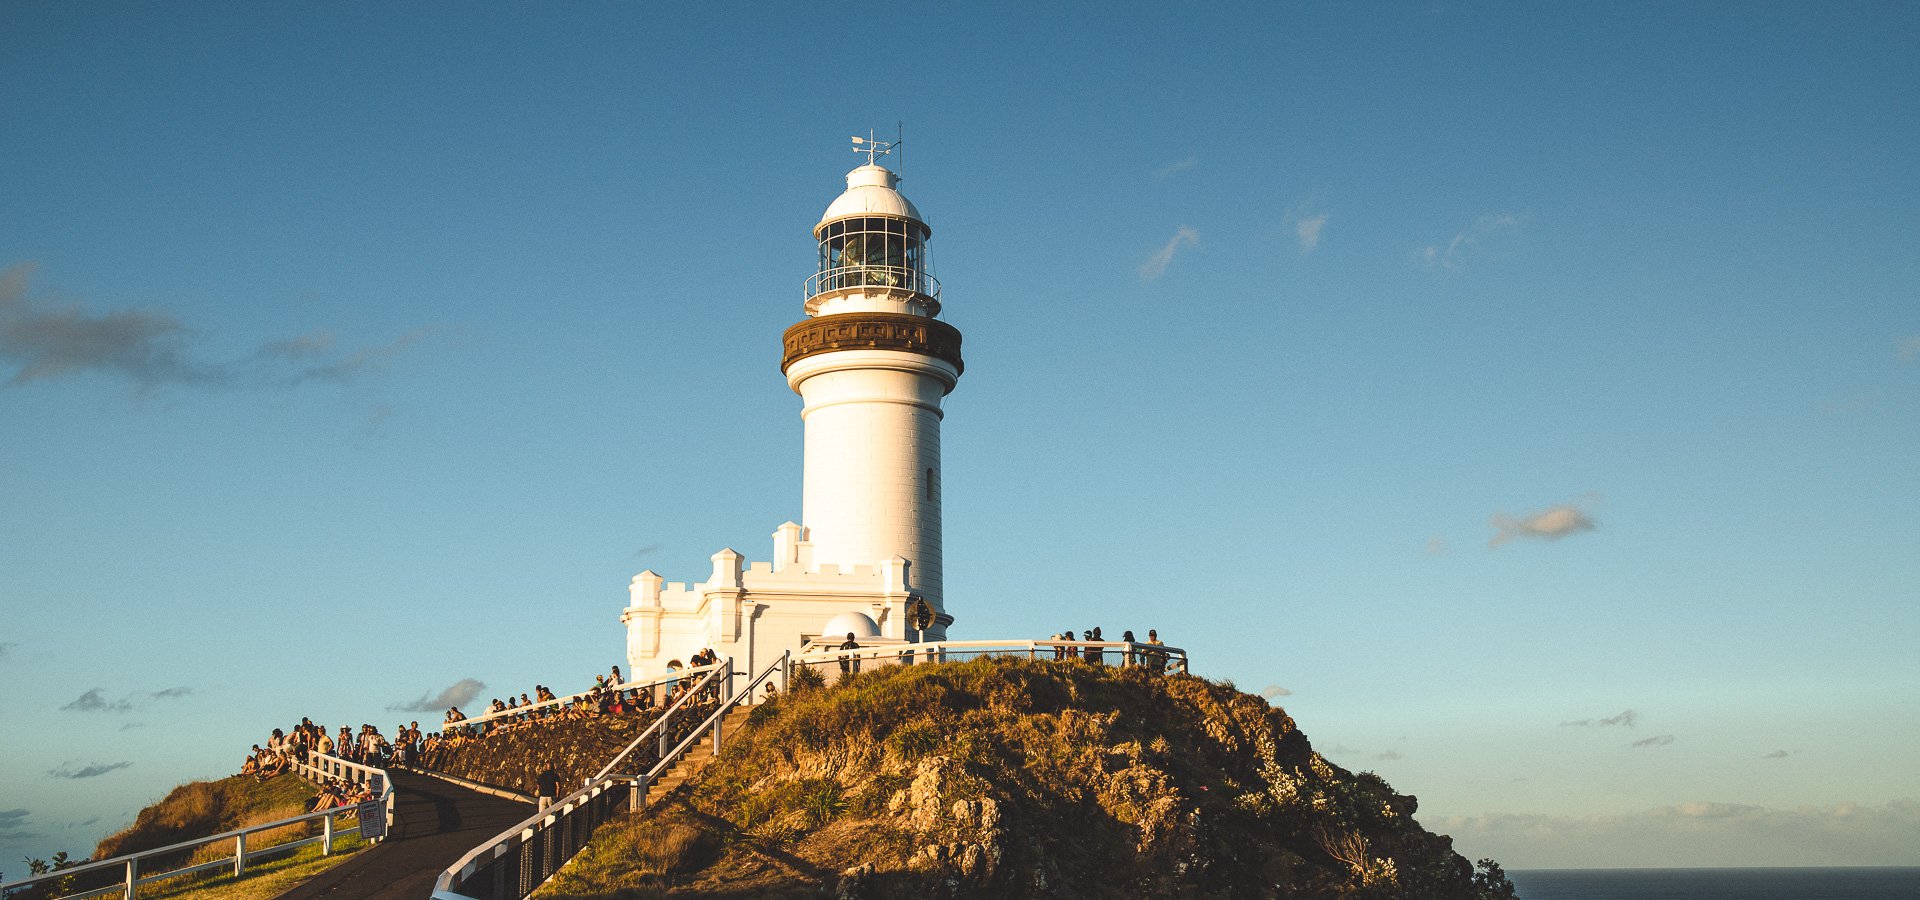 The Ultimate Byron Bay Travel Guide | byron bay travel guide 2